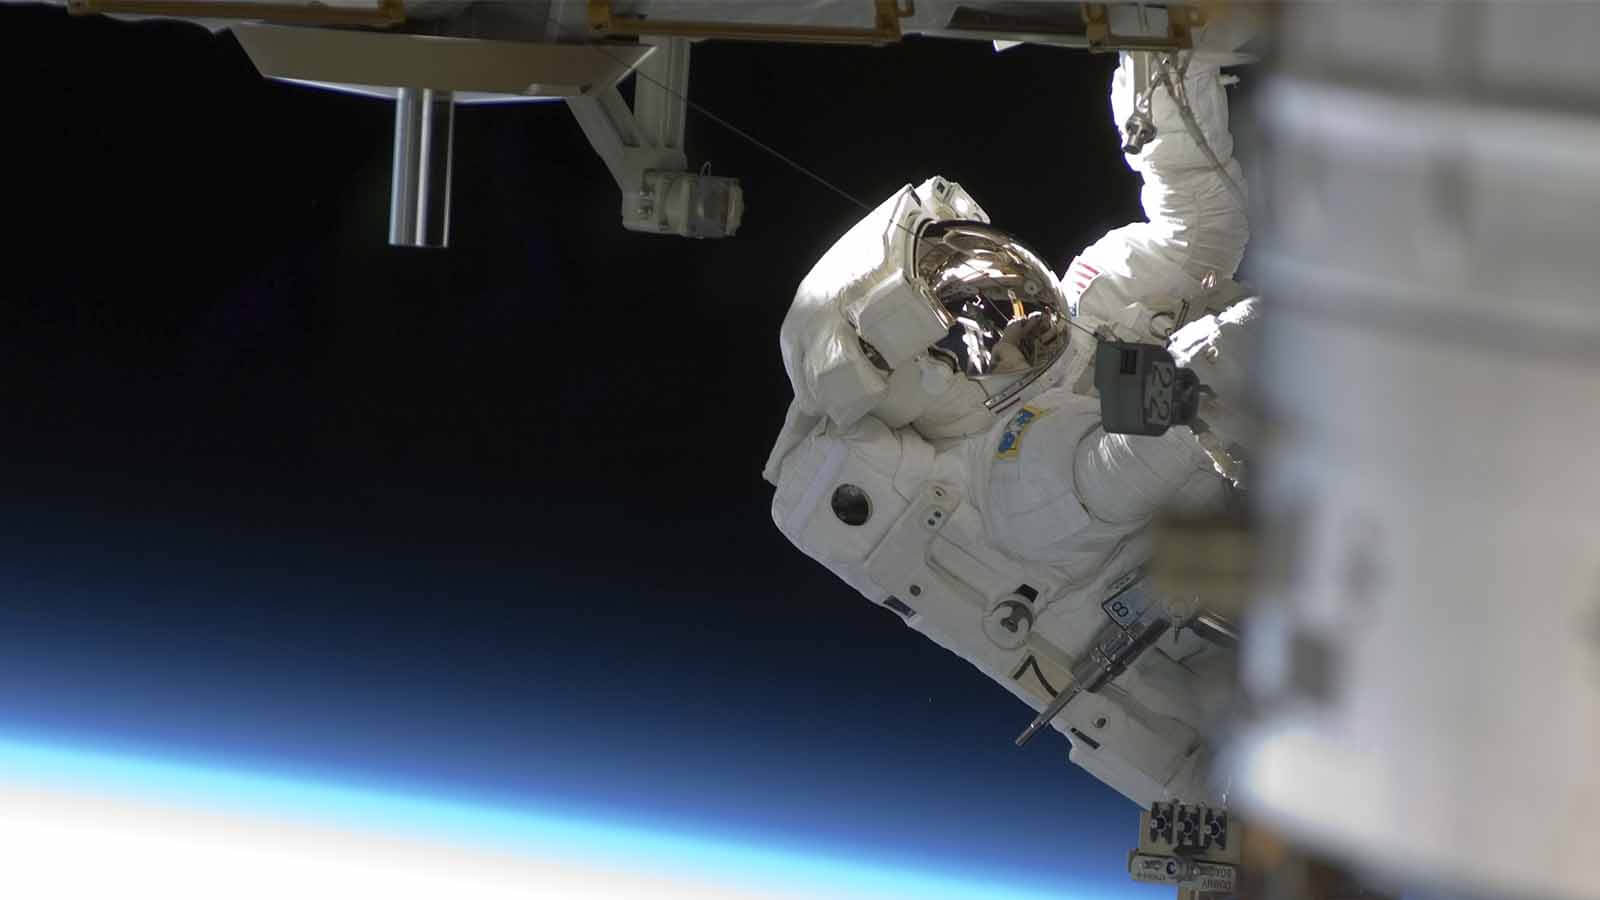 An Astronaut working in space